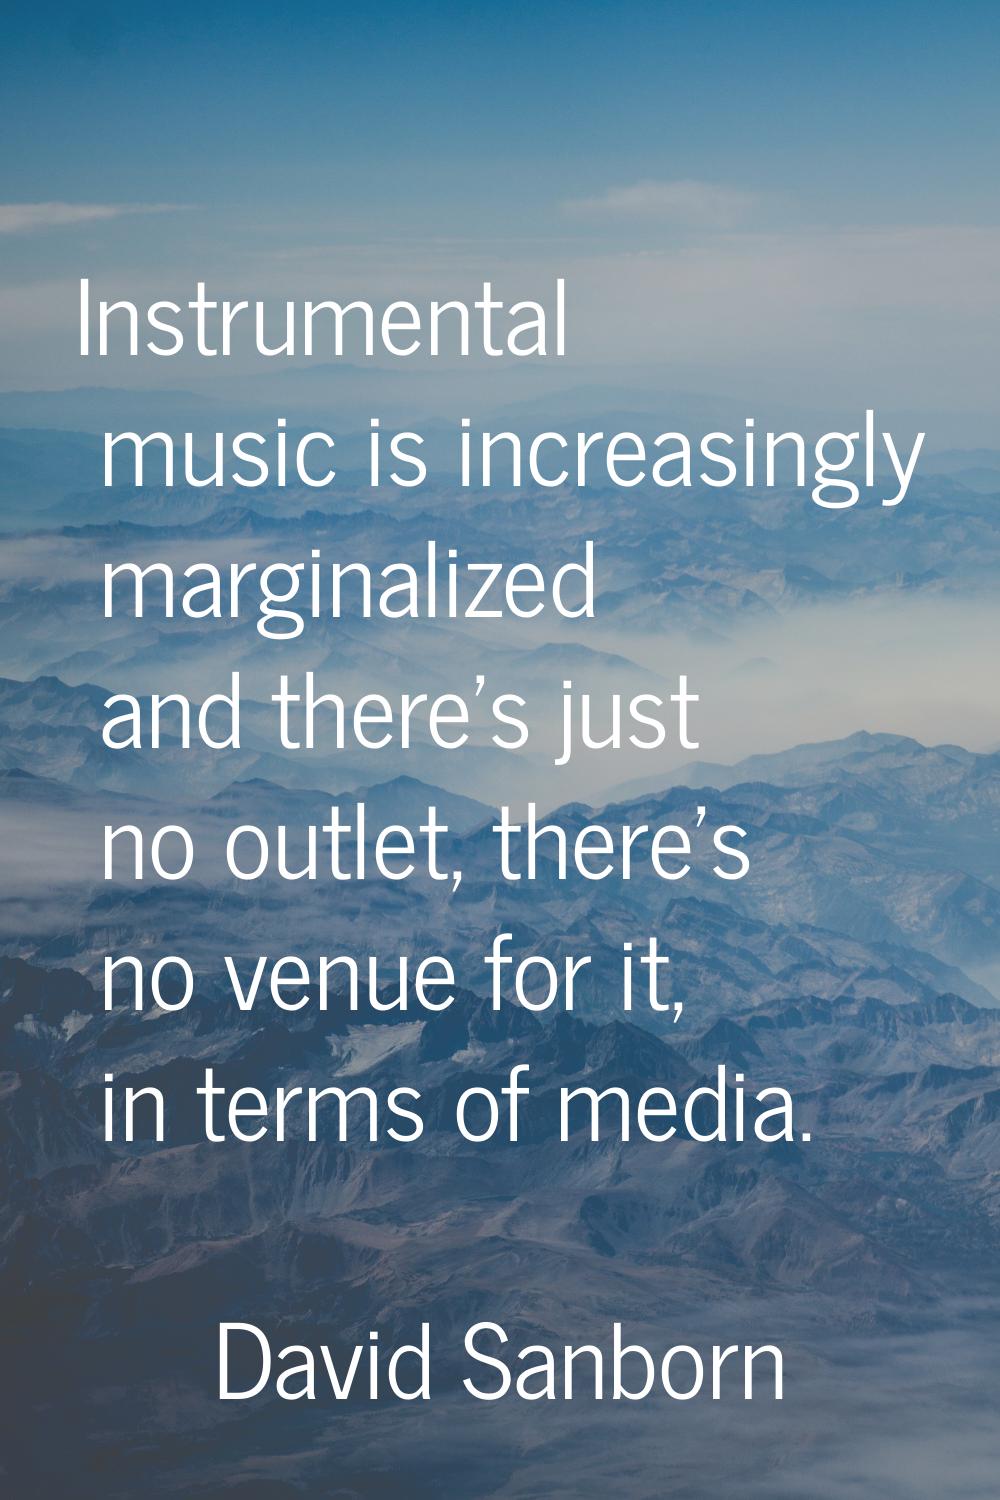 Instrumental music is increasingly marginalized and there's just no outlet, there's no venue for it